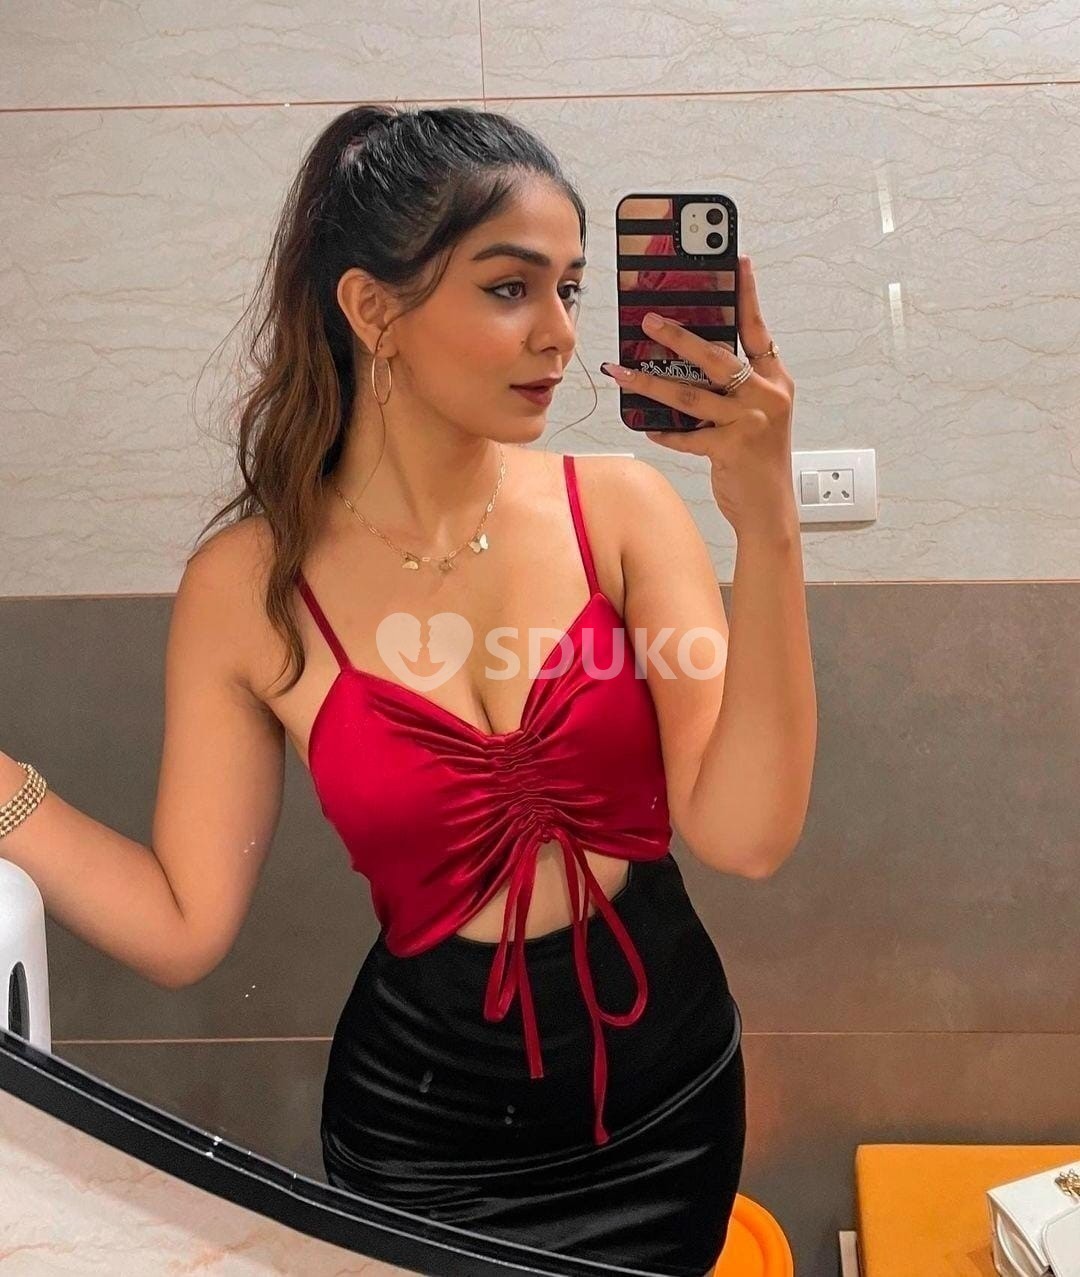 VALSAD 💎 AMISHA INDIPENDENT CALL GIRL SERVICE IN & OUTCALL 🇮🇳TRUST